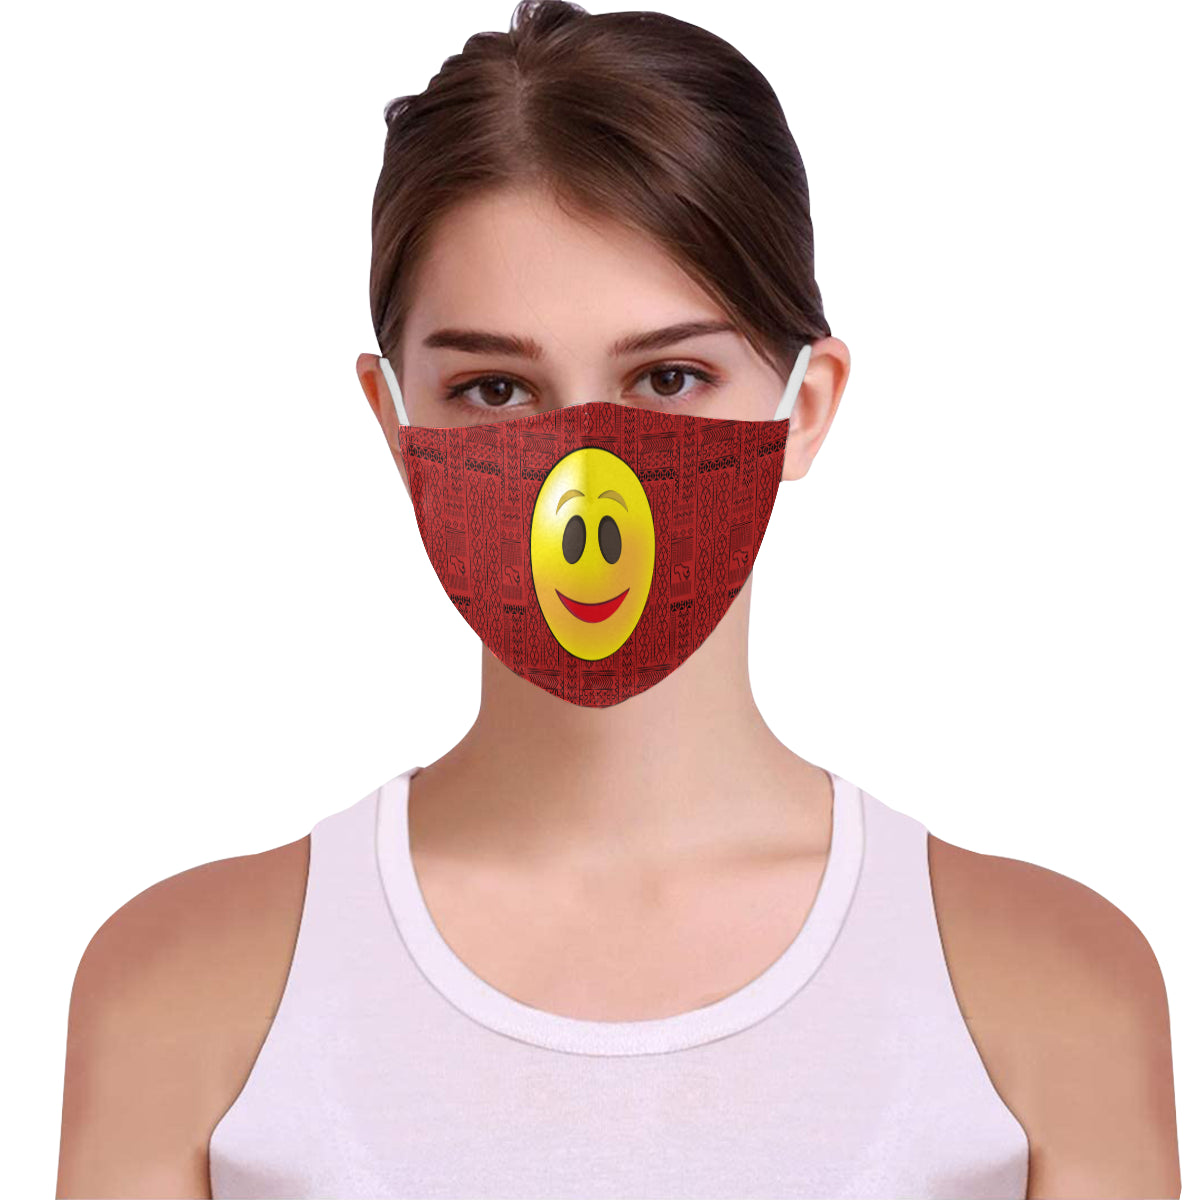 Hi! Tribal Print Emoji Cotton Fabric Face Mask with Filter Slot and Adjustable Strap - Non-medical use (2 Filters Included)